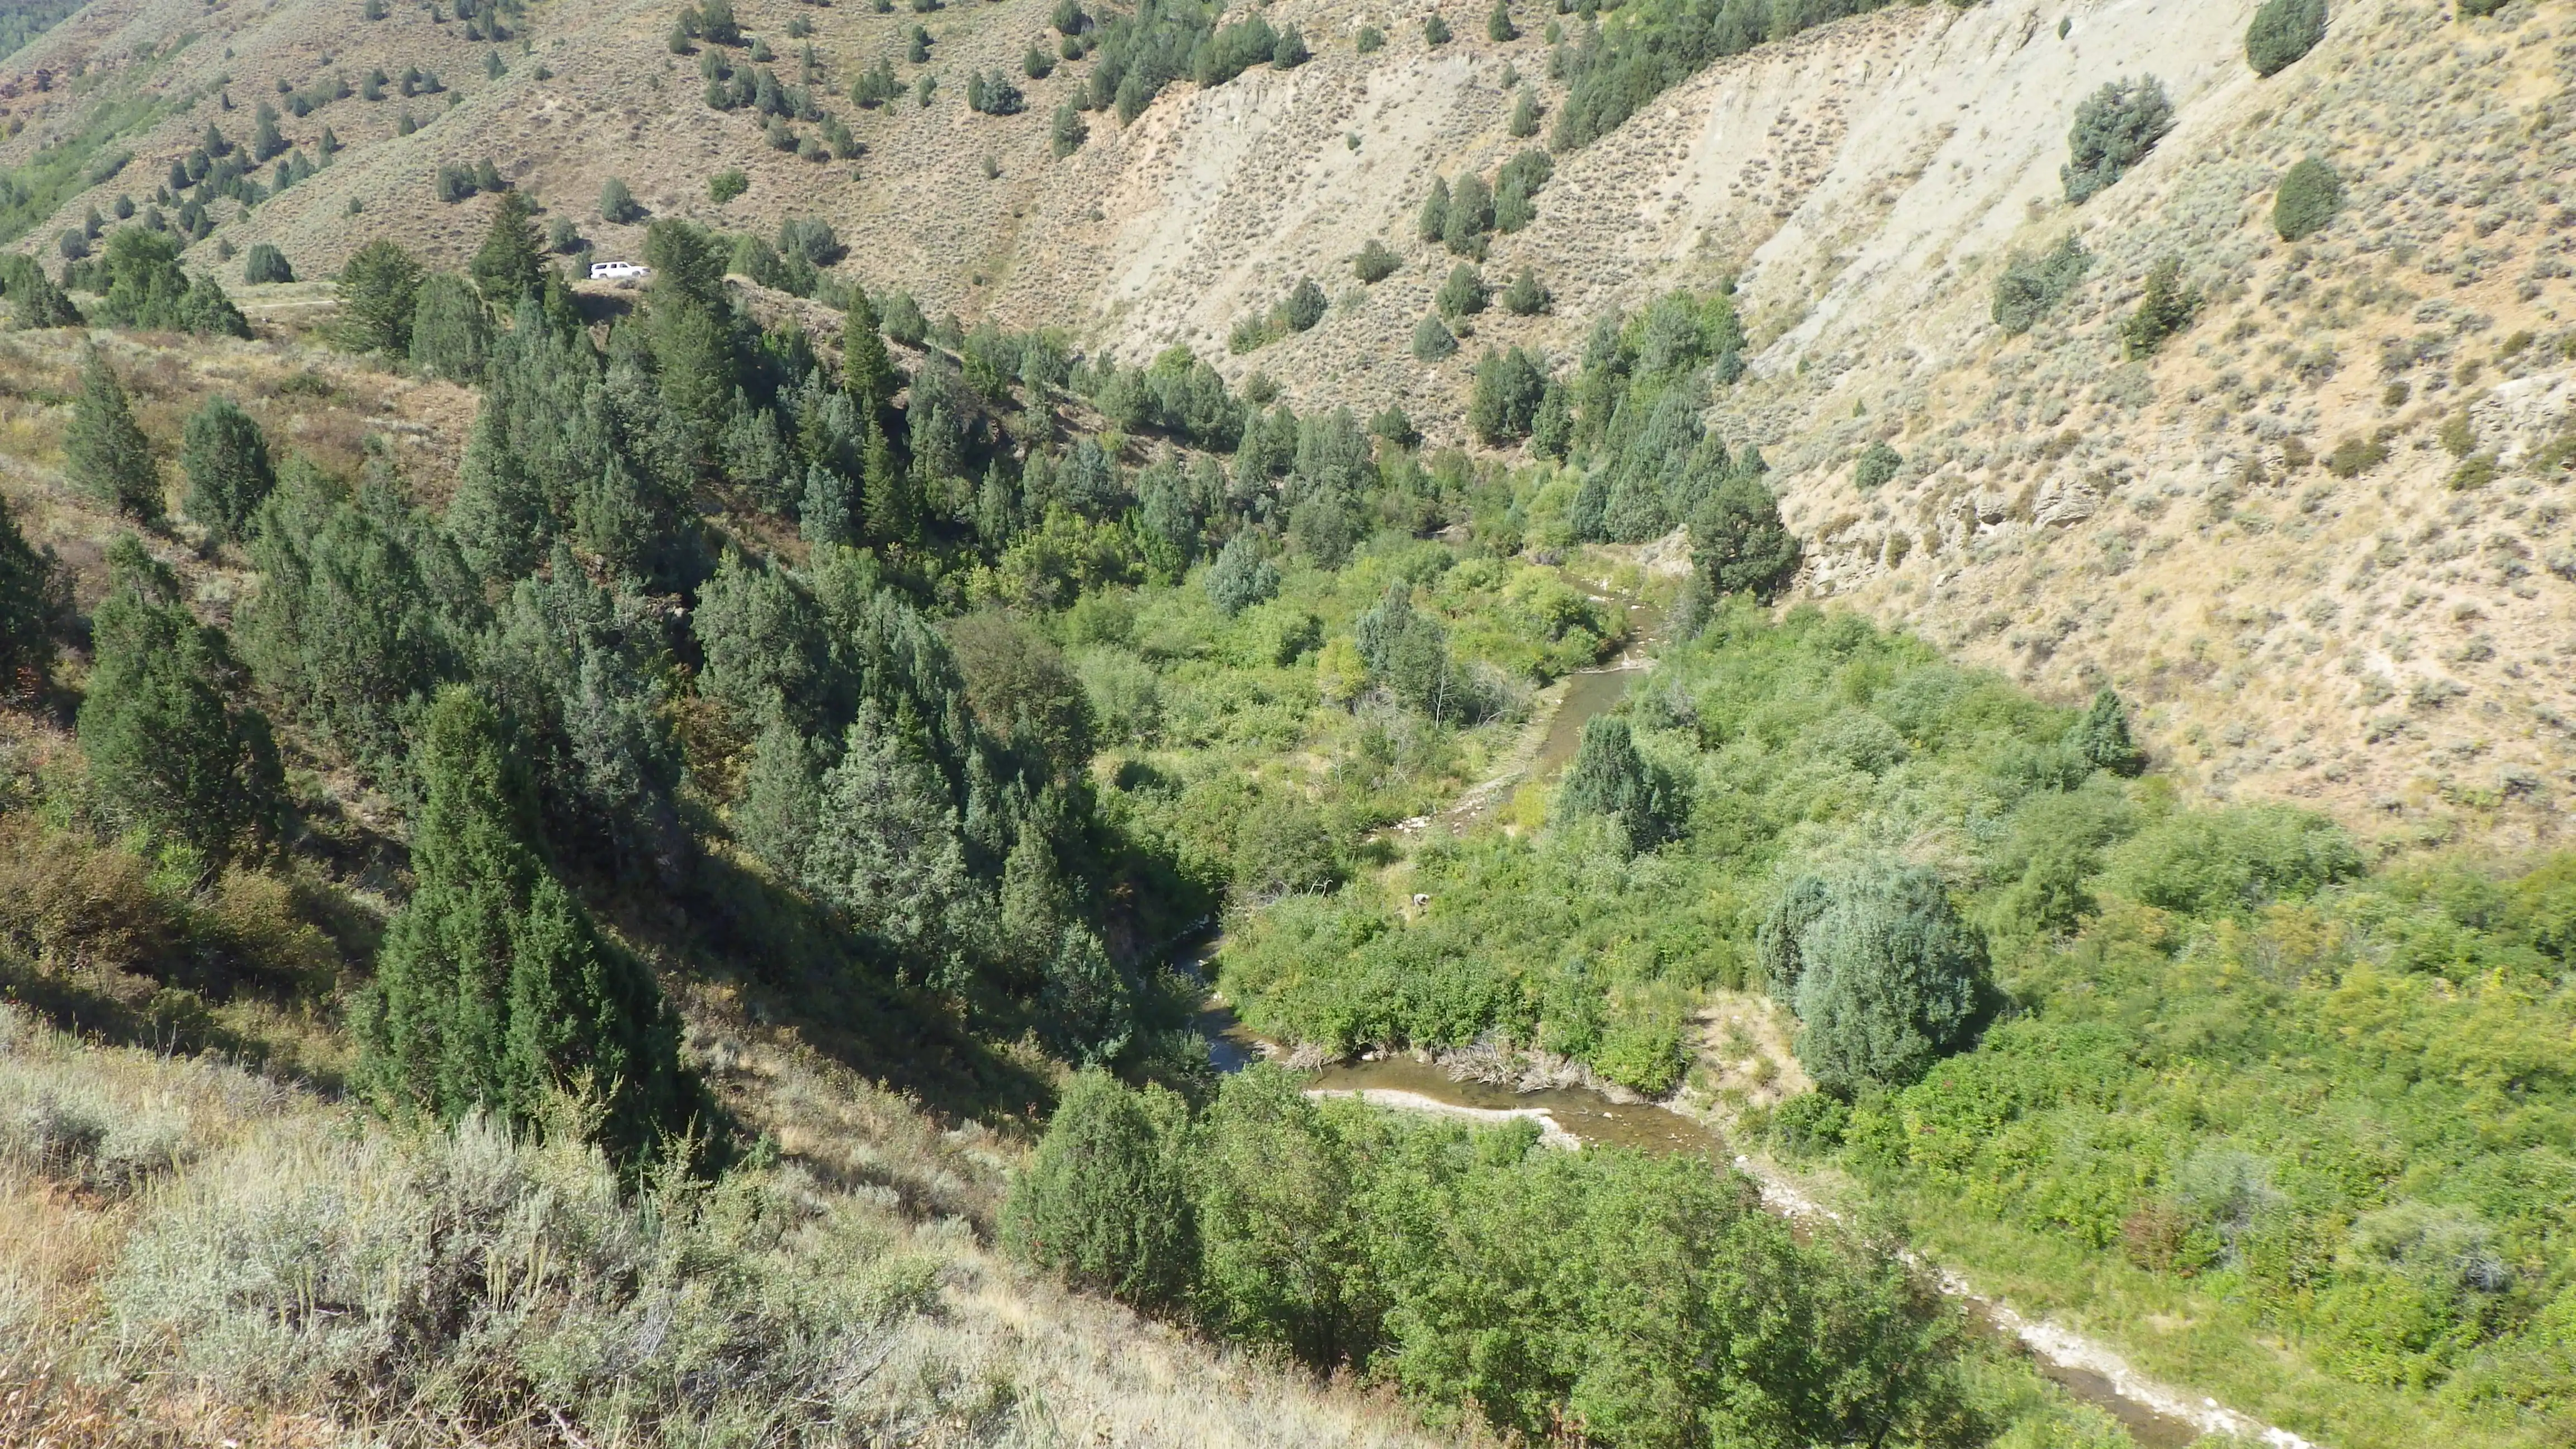 A desert valley, with shrubs and trees lining the stream banks and floodplain.